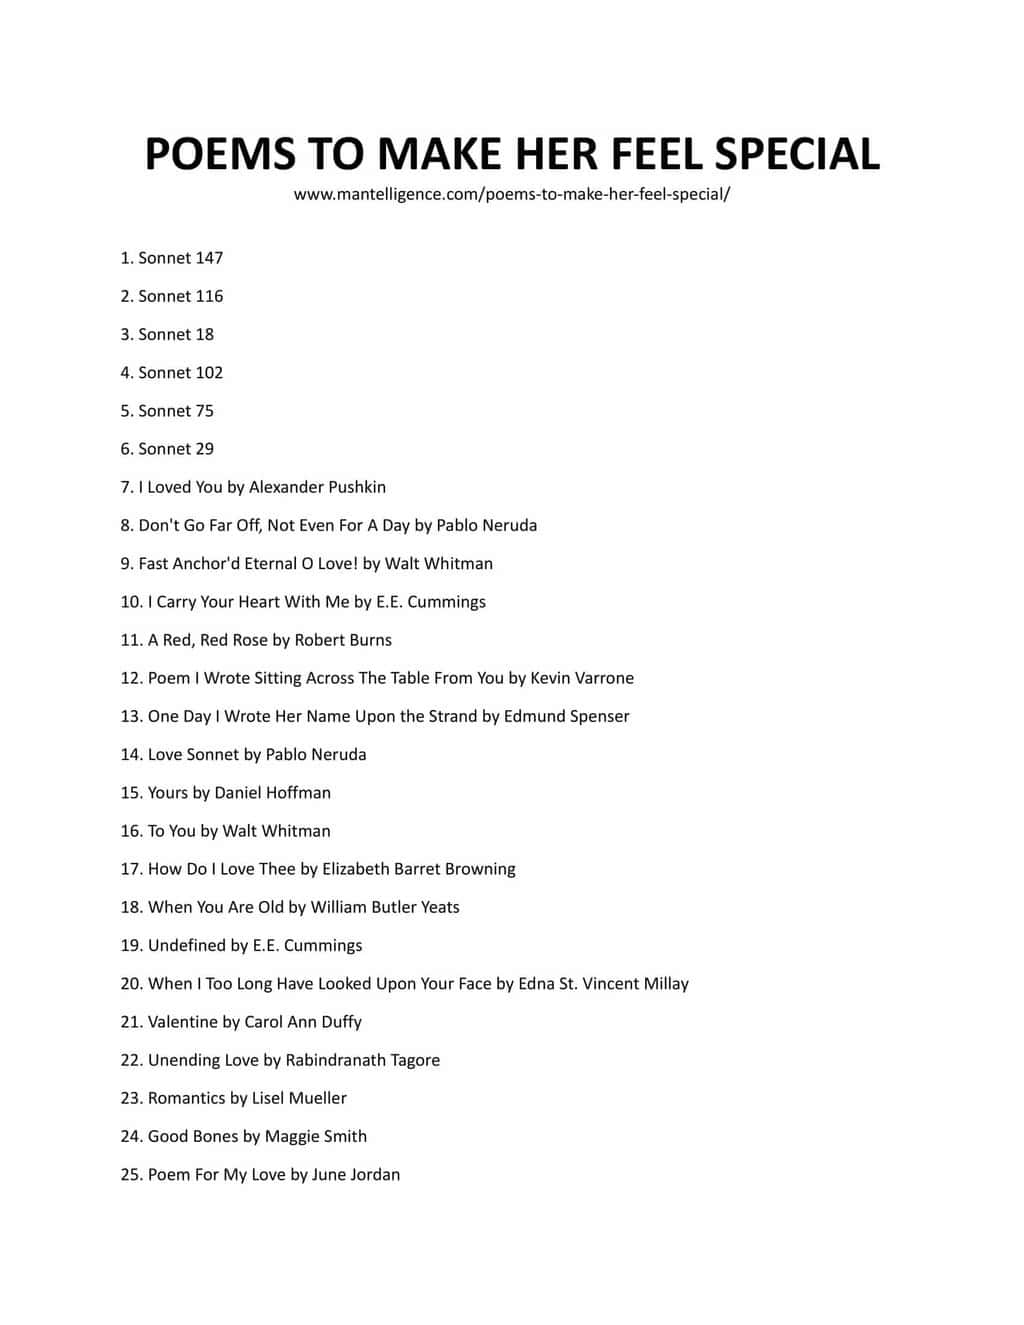 List of Downloadable List of poem that make her feel special